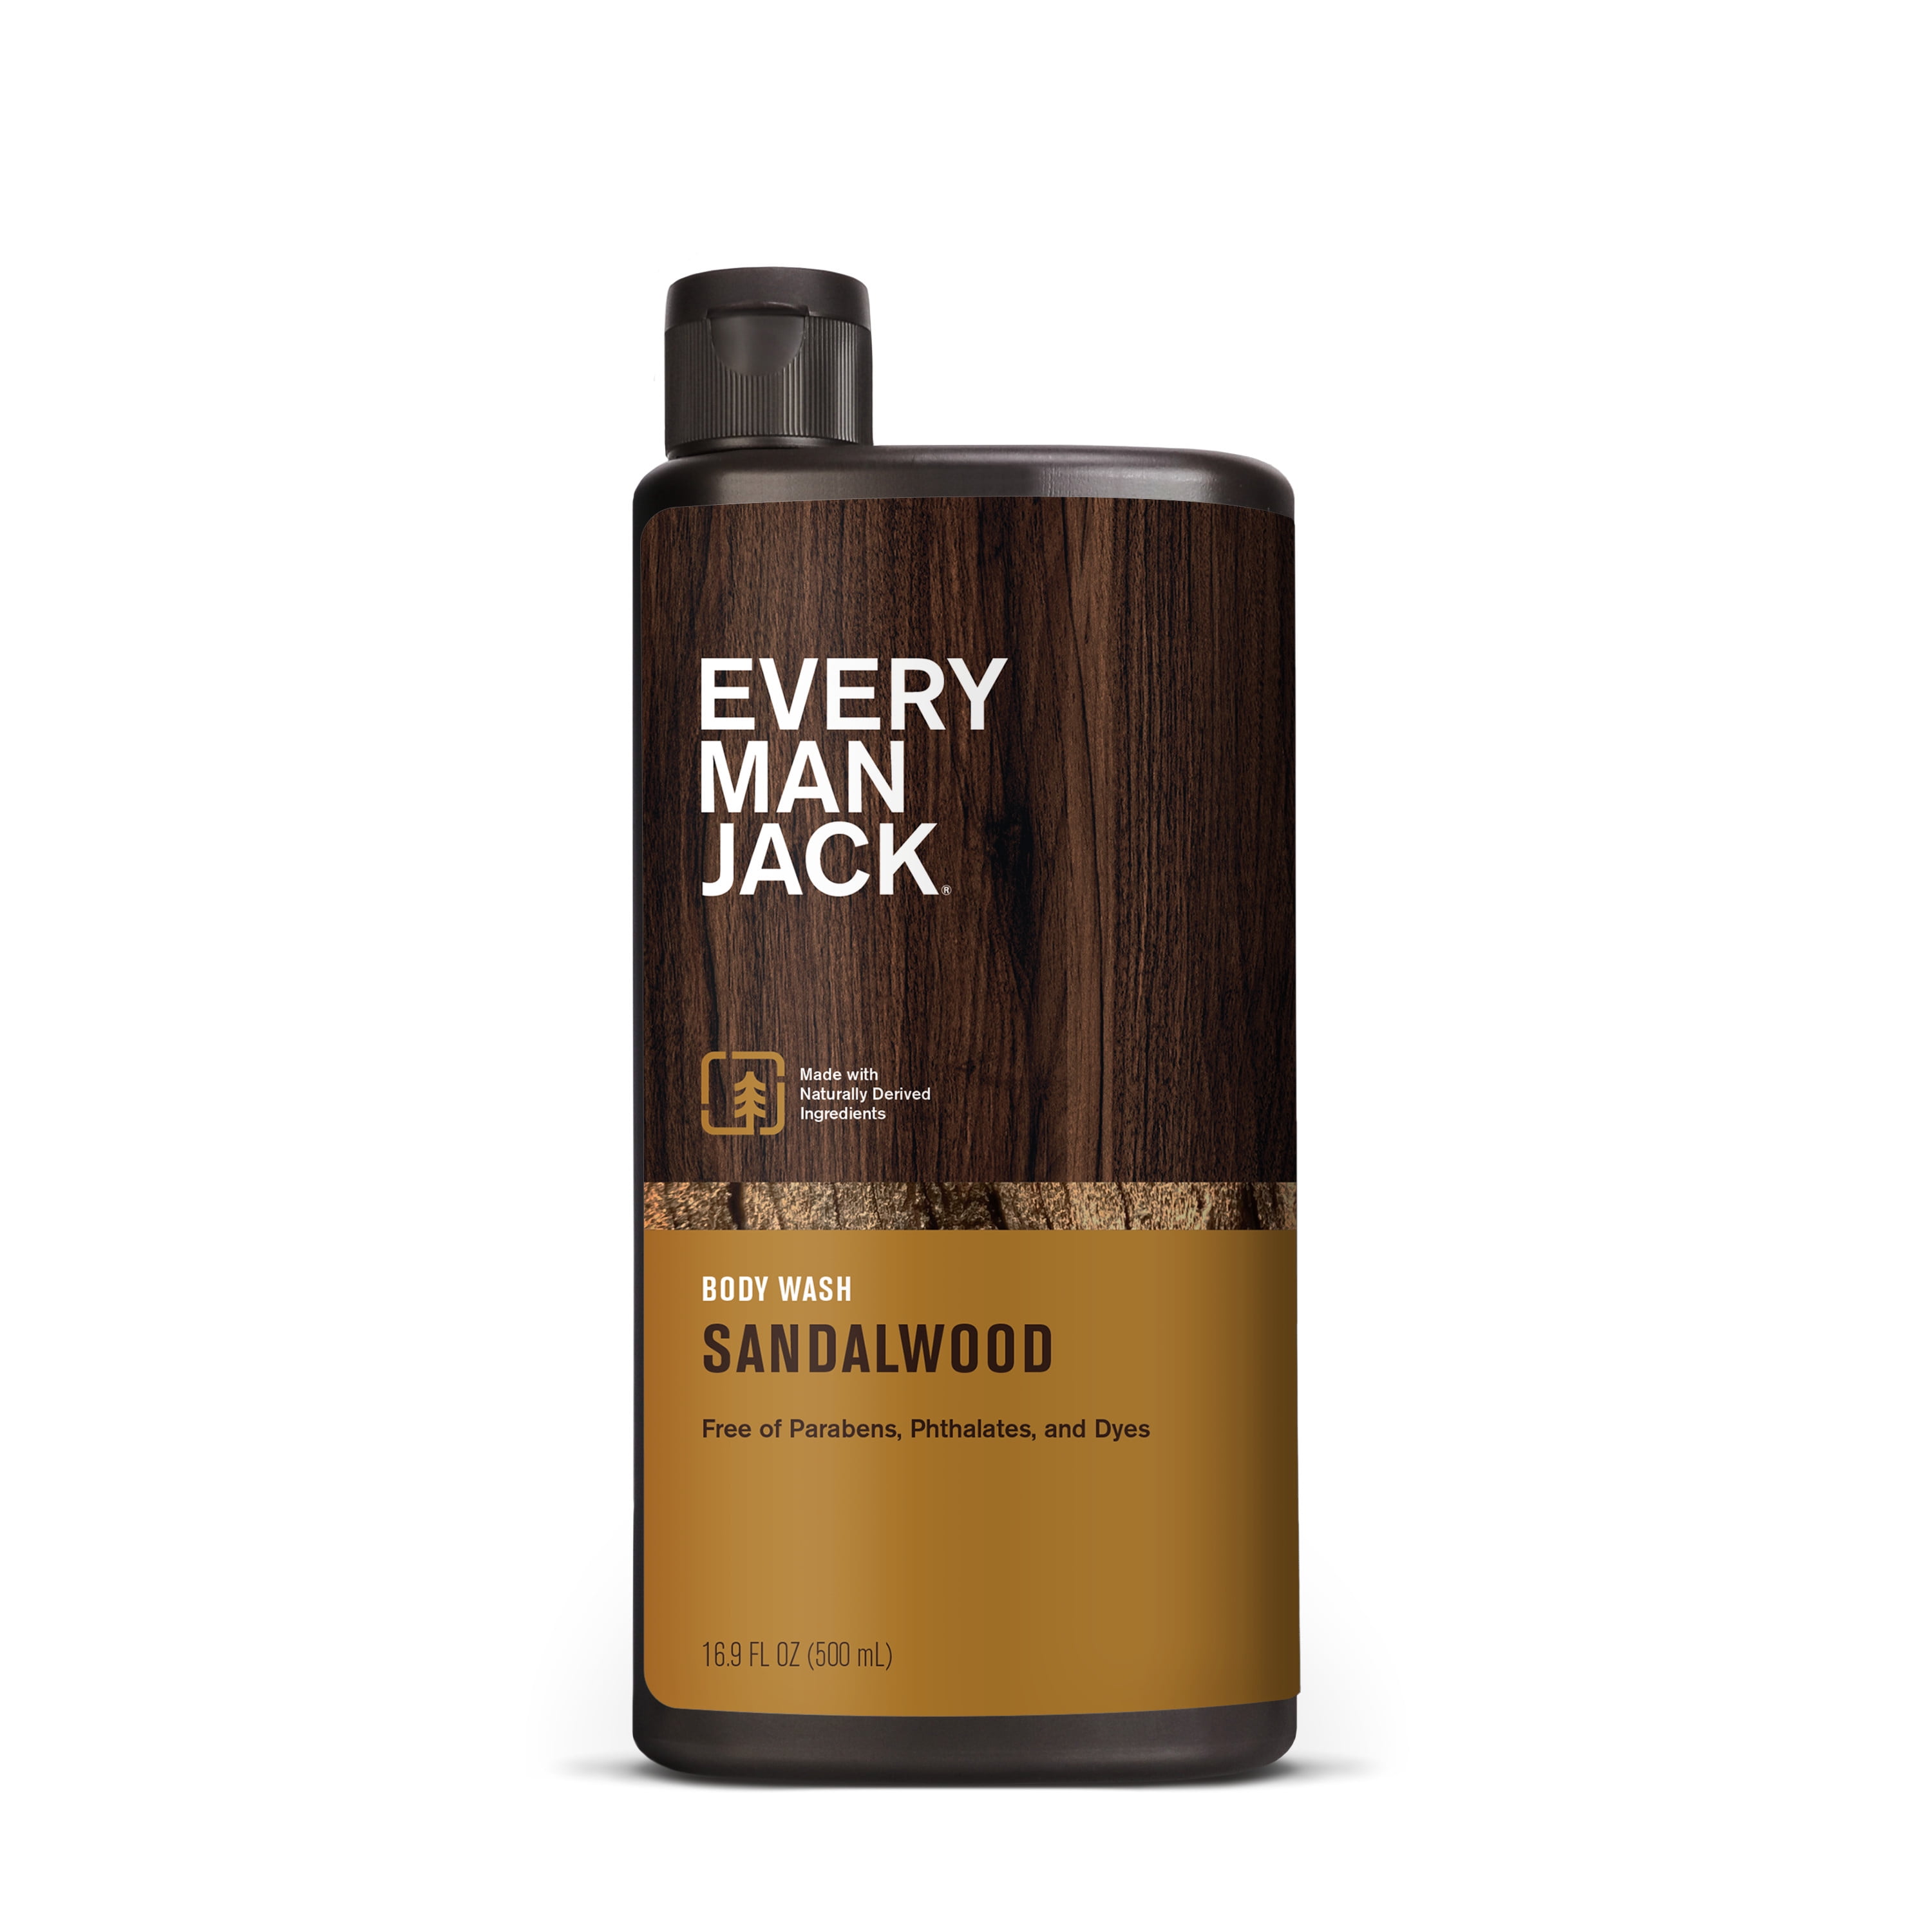 Every Man Jack Sandalwood Hydrating Body Wash for Men, Naturally Derived, 16.9 oz